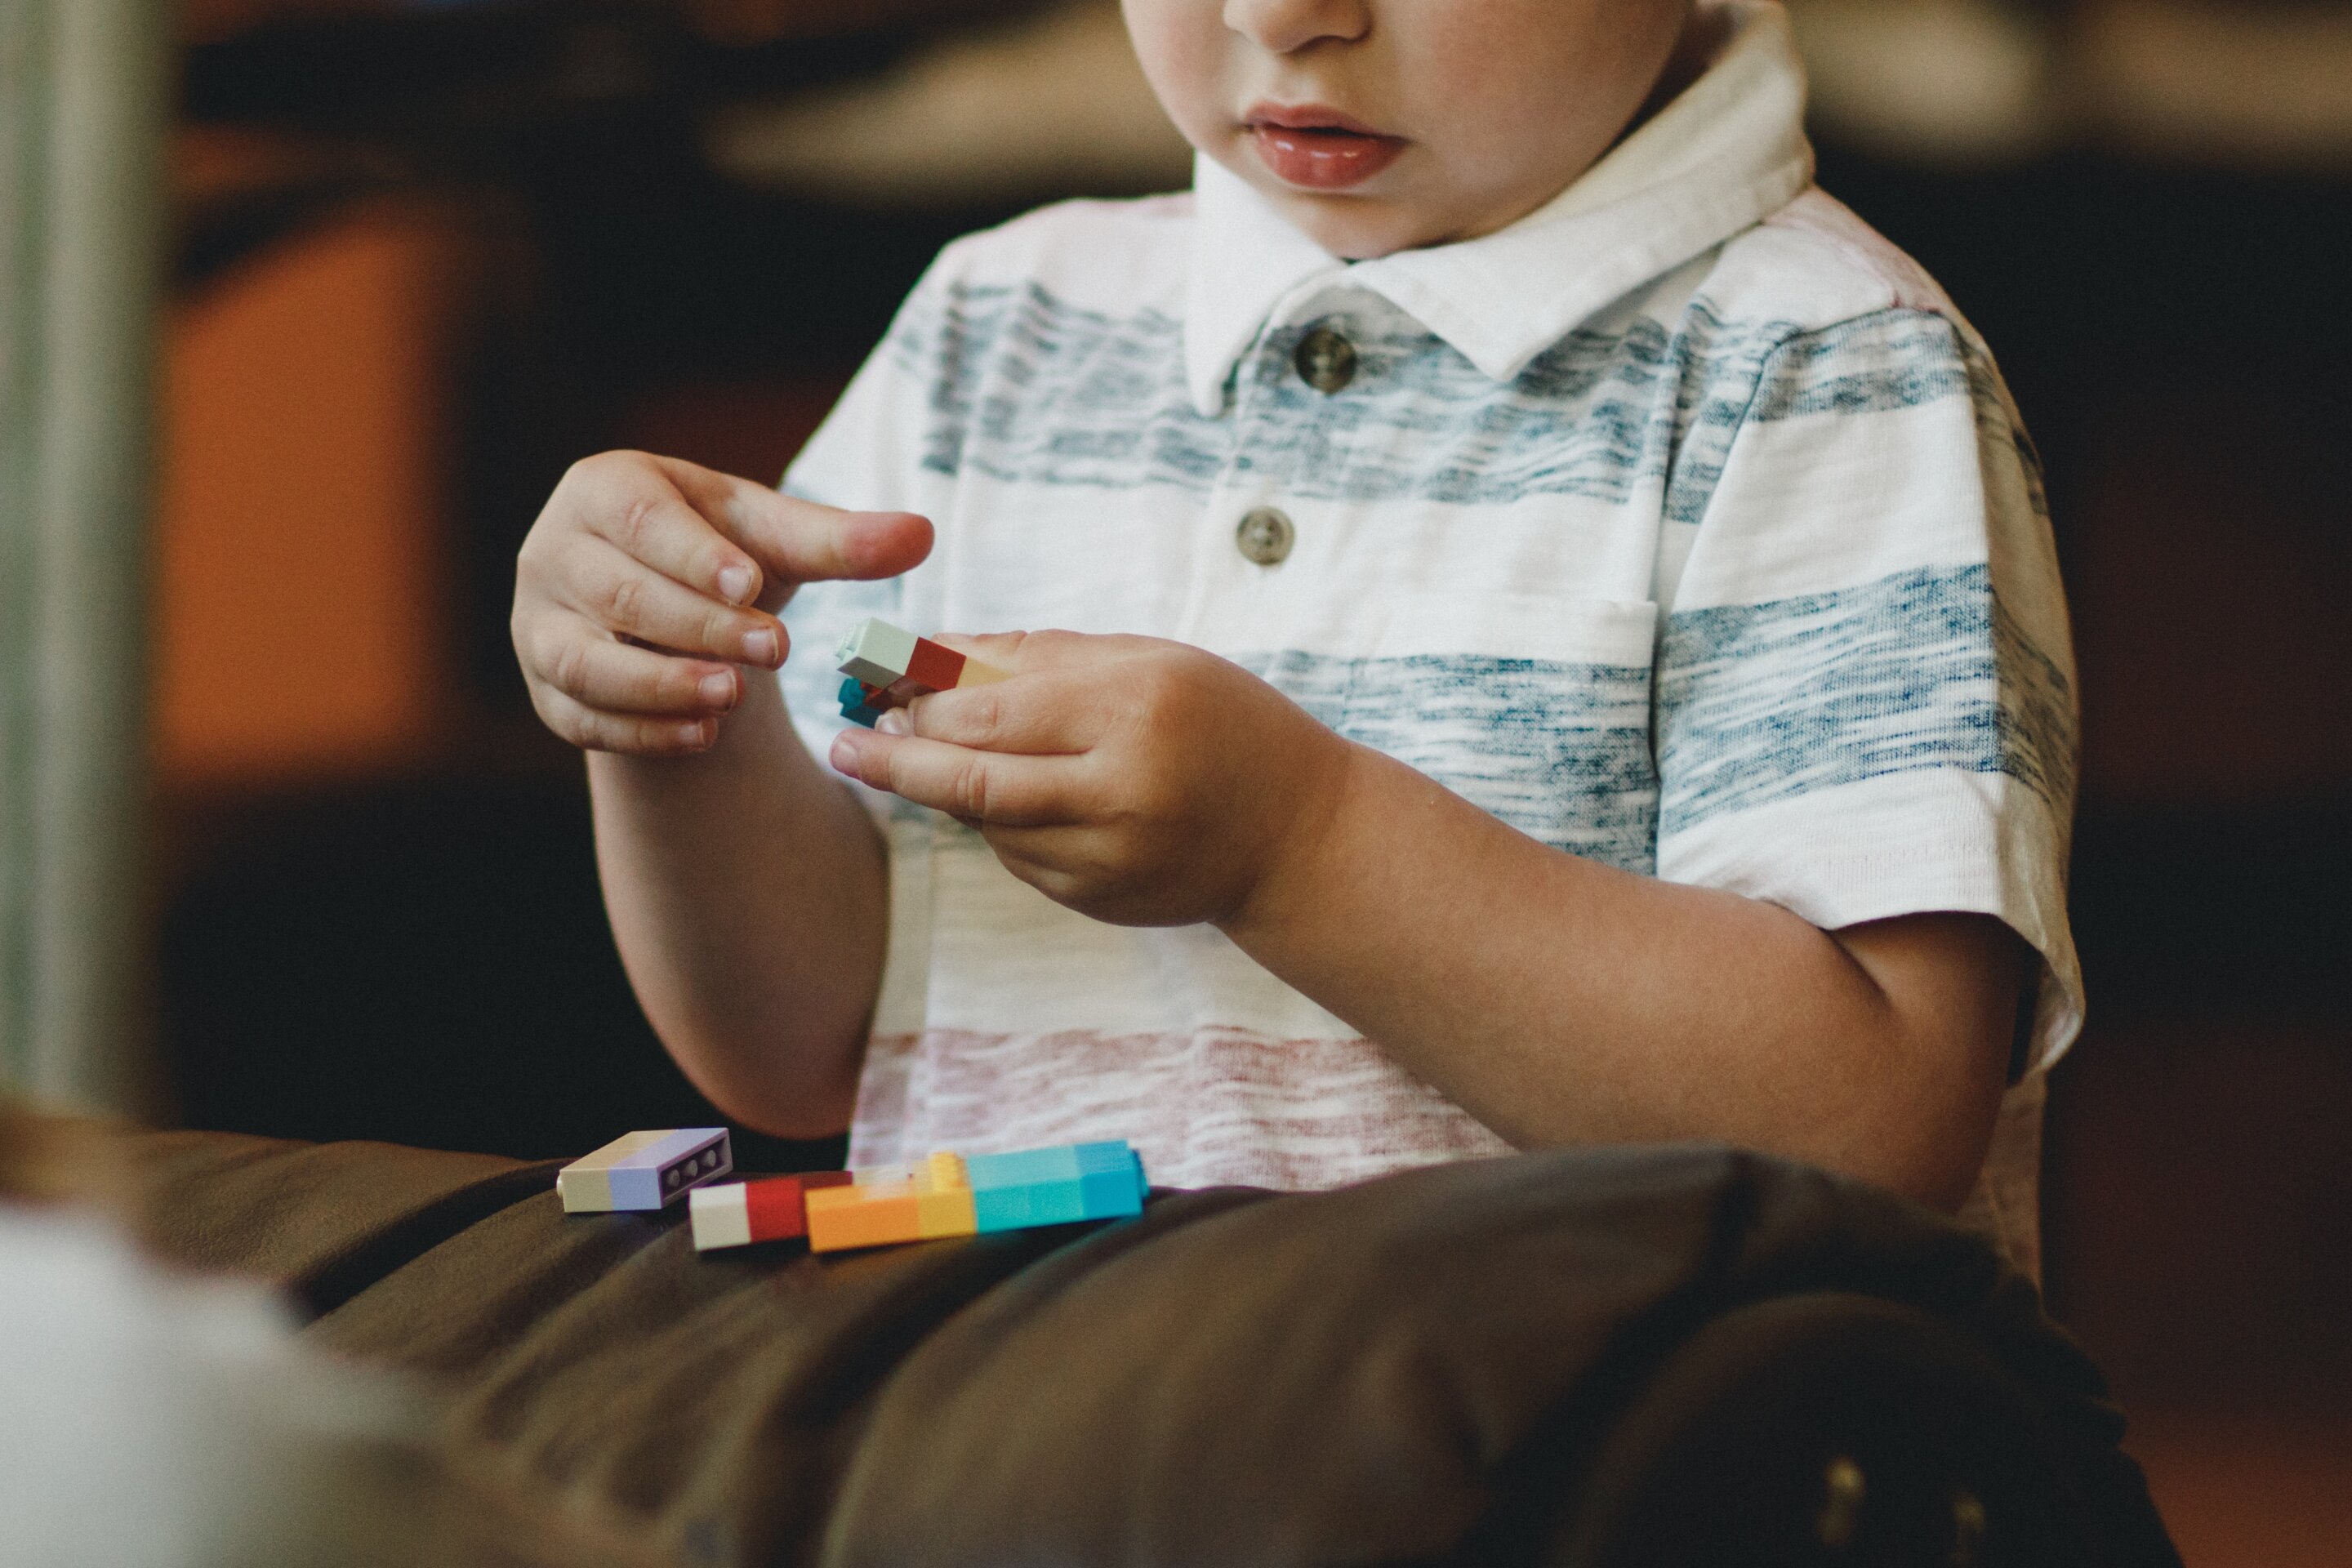 #Linking epigenetic biomarkers to gastrointestinal issues for kids with autism